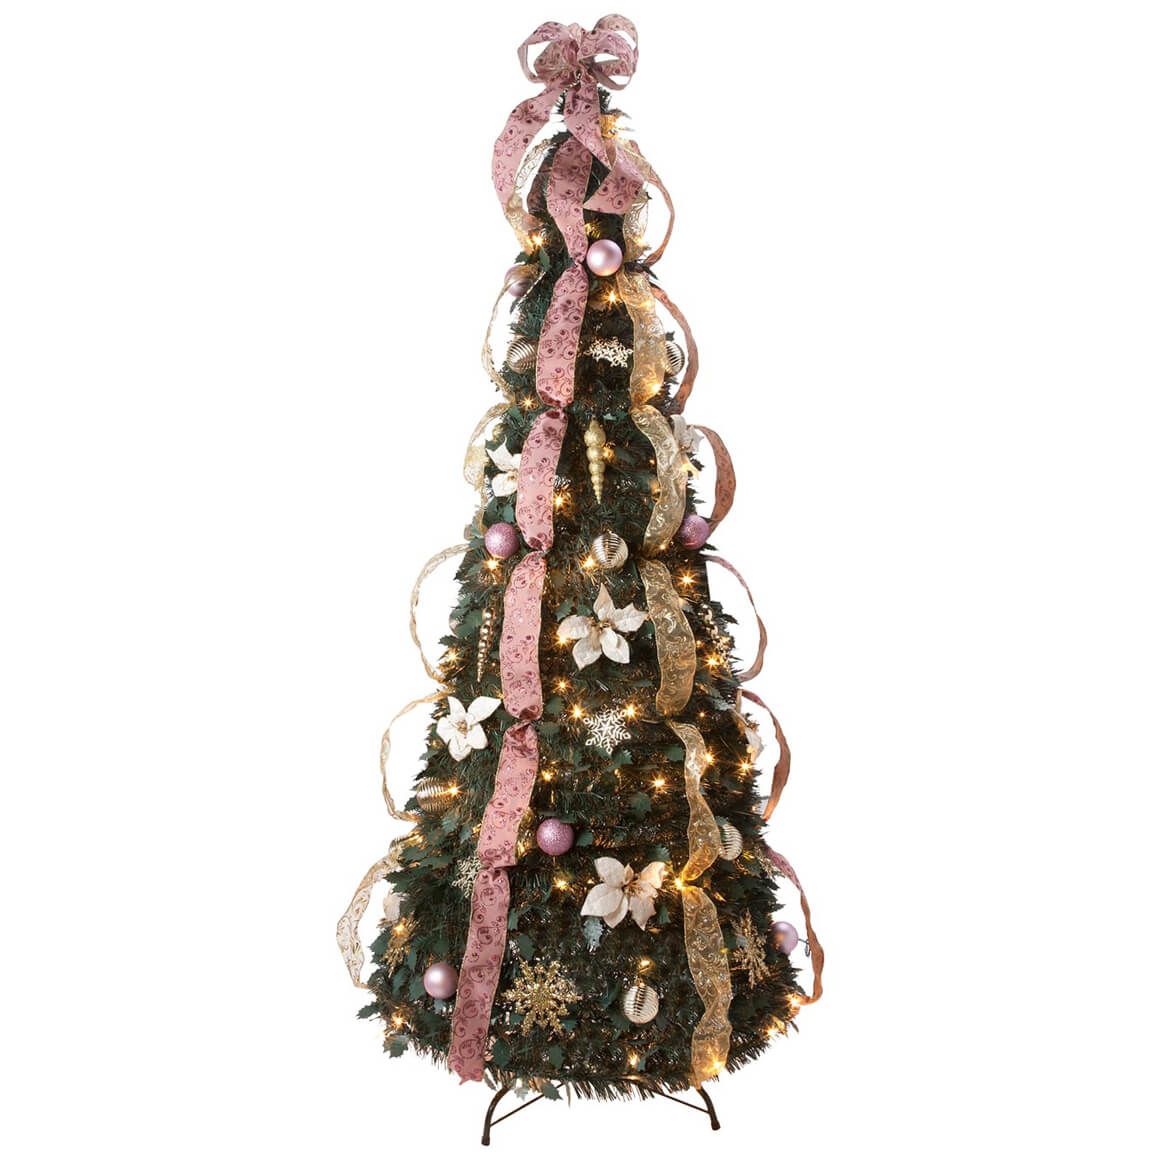 6' Victorian Style Pull-Up Tree by Holiday Peak™     XL + '-' + 356213